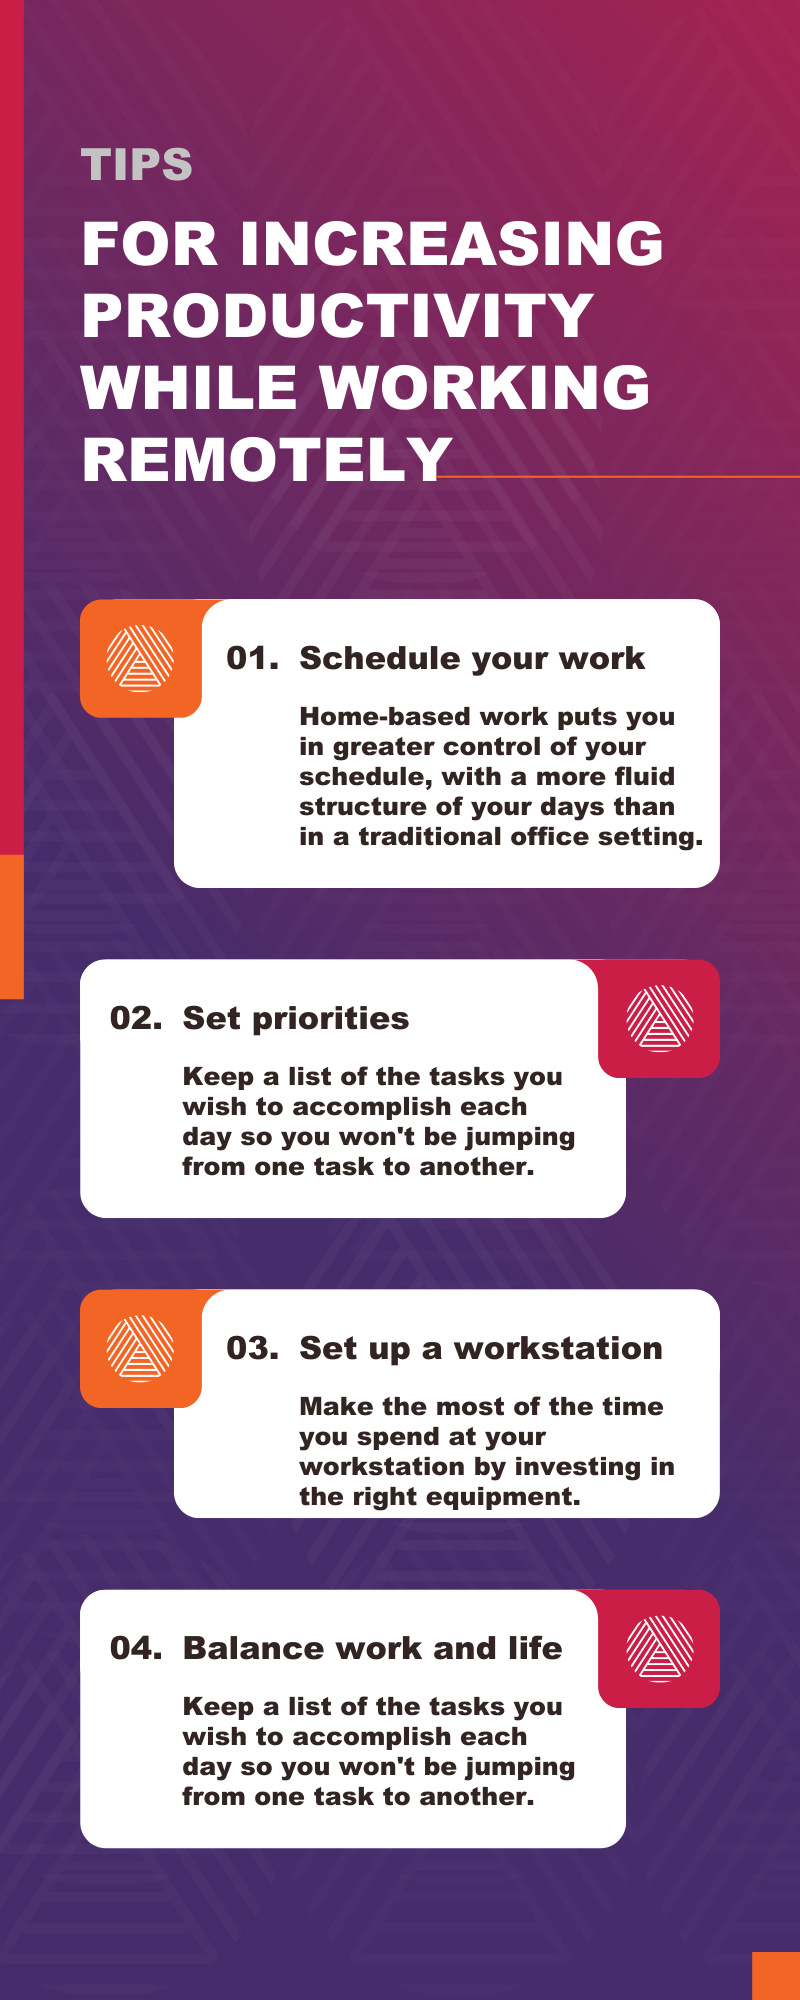 Increasing Productivity While Remote Working Infographic